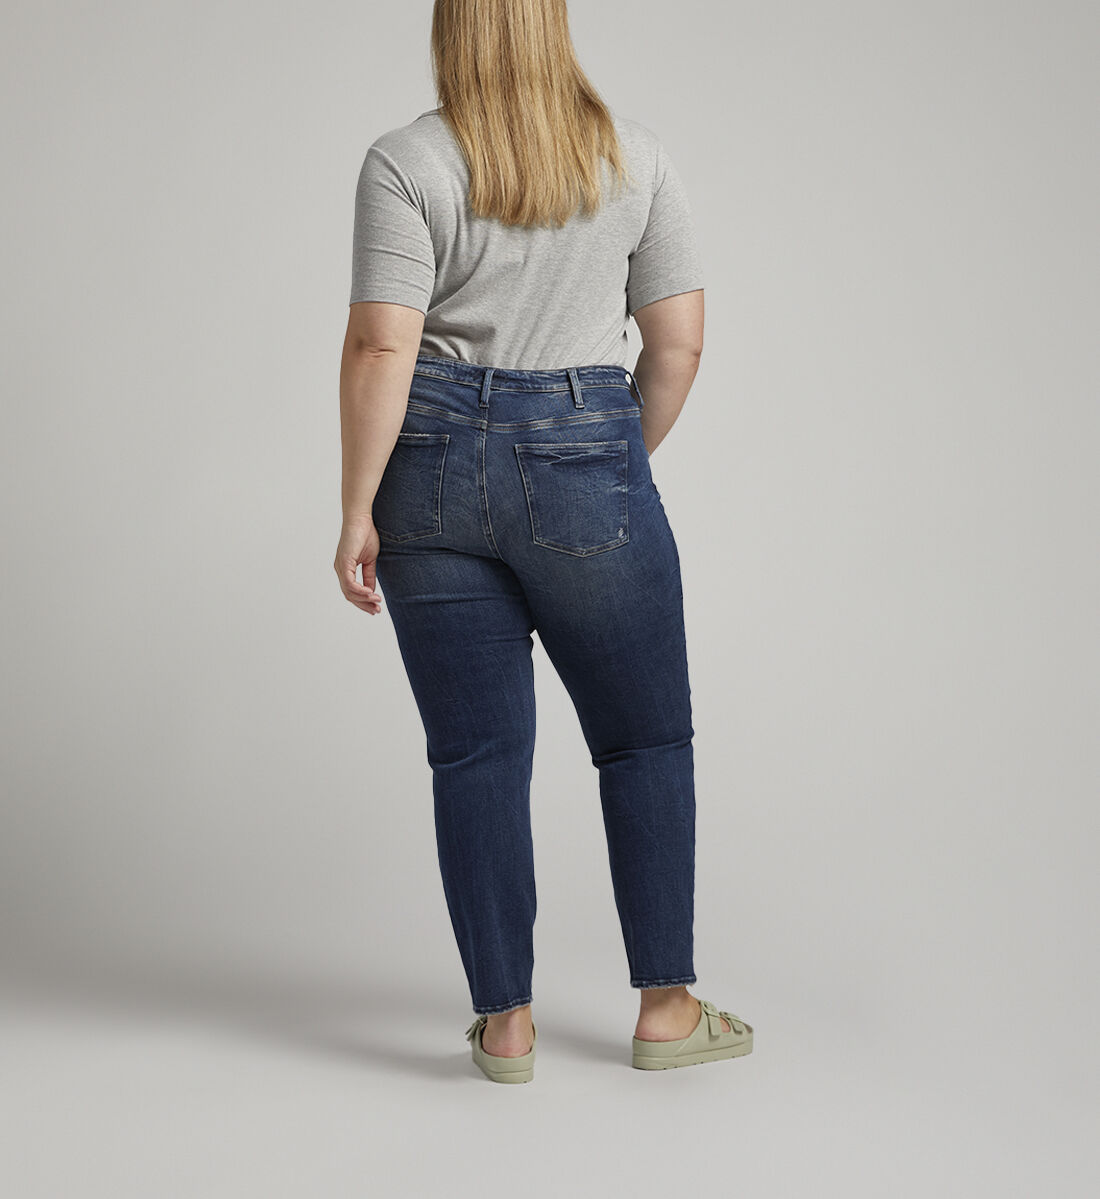 Plus Size Jeans That Flatter Every Shape | Silver Jeans